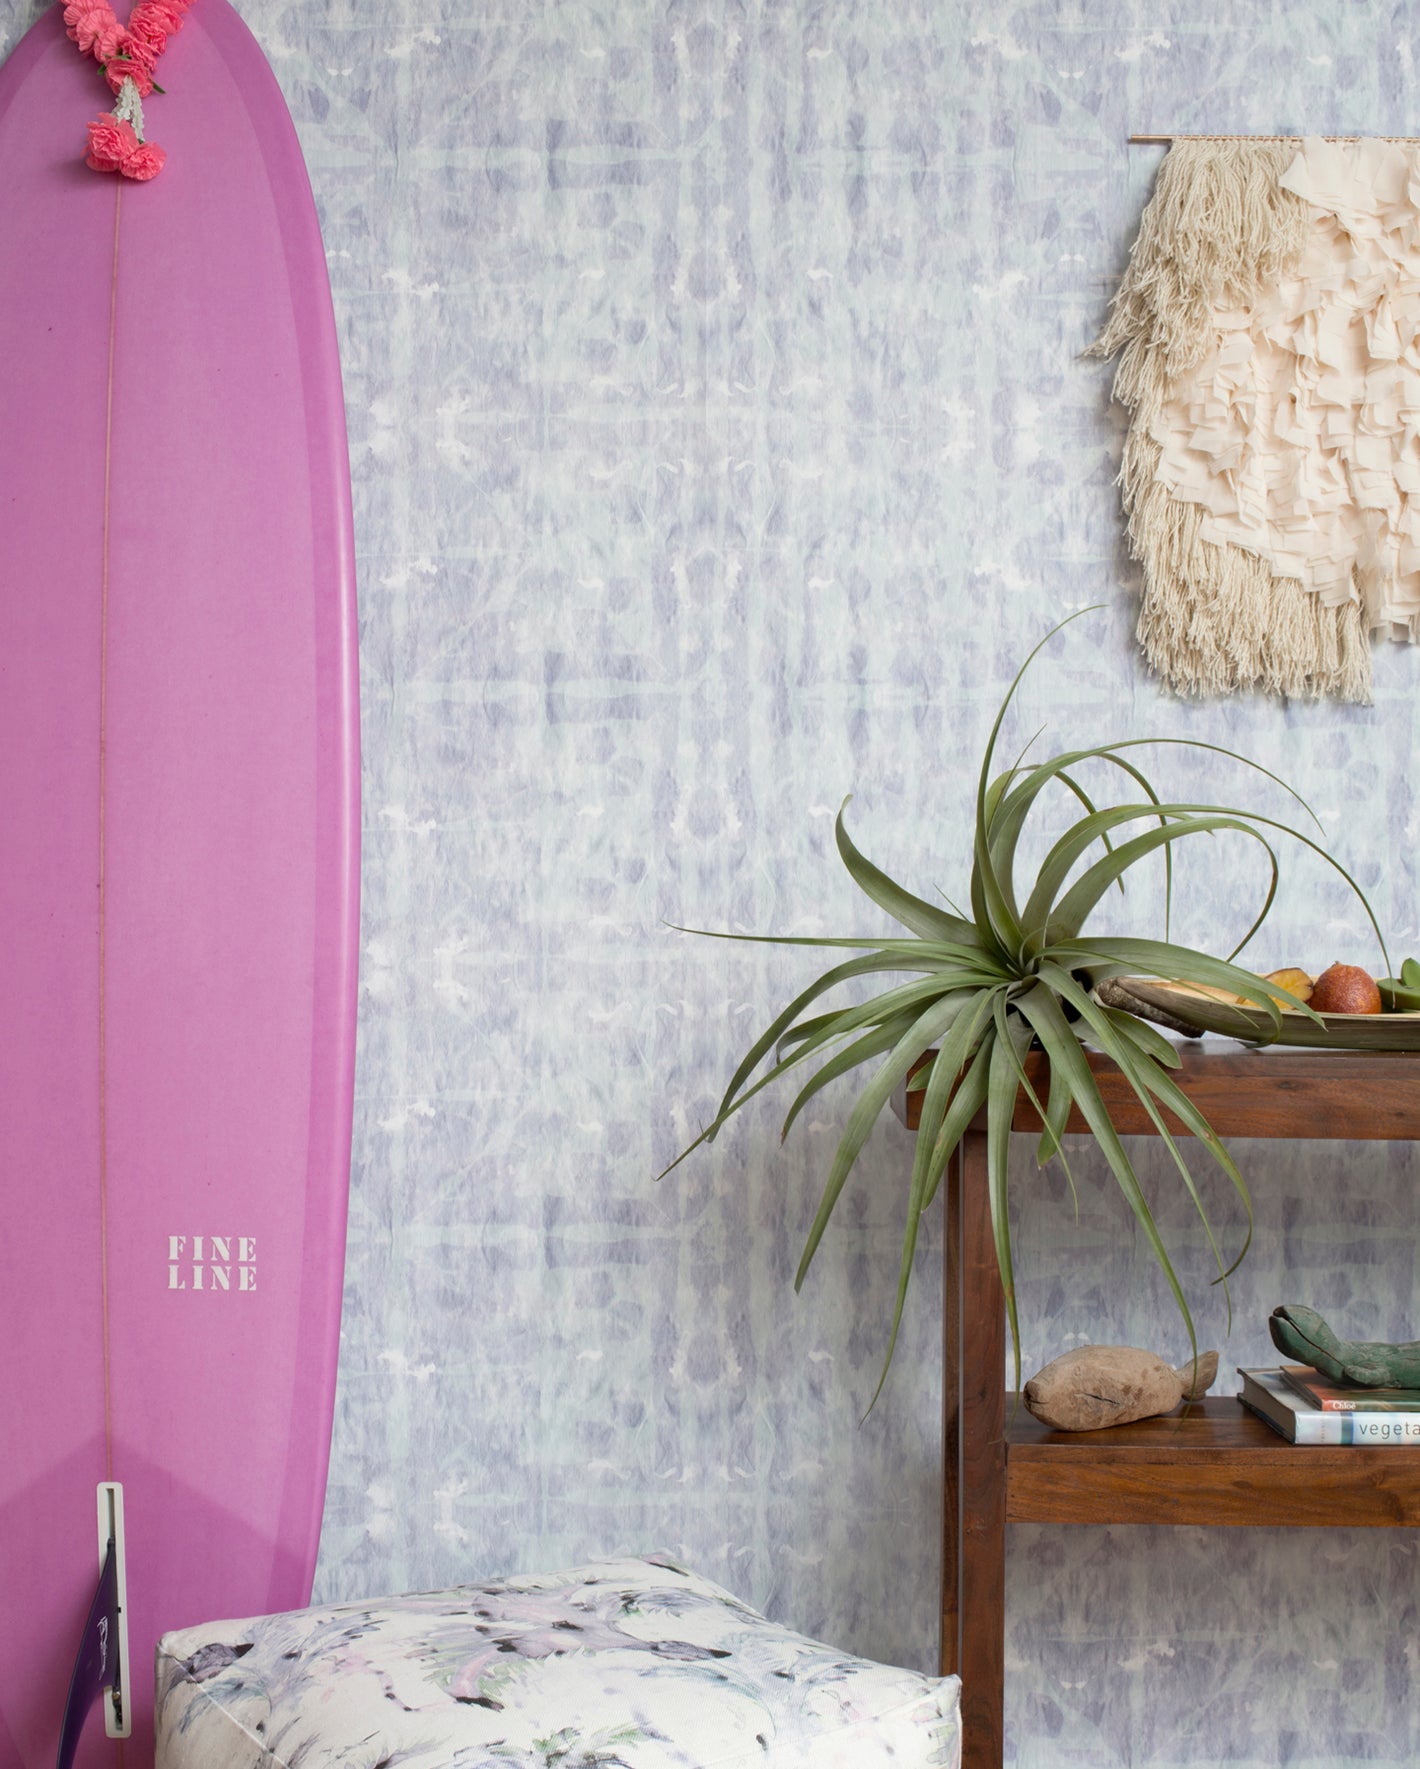 A surfboard leaning against a wall